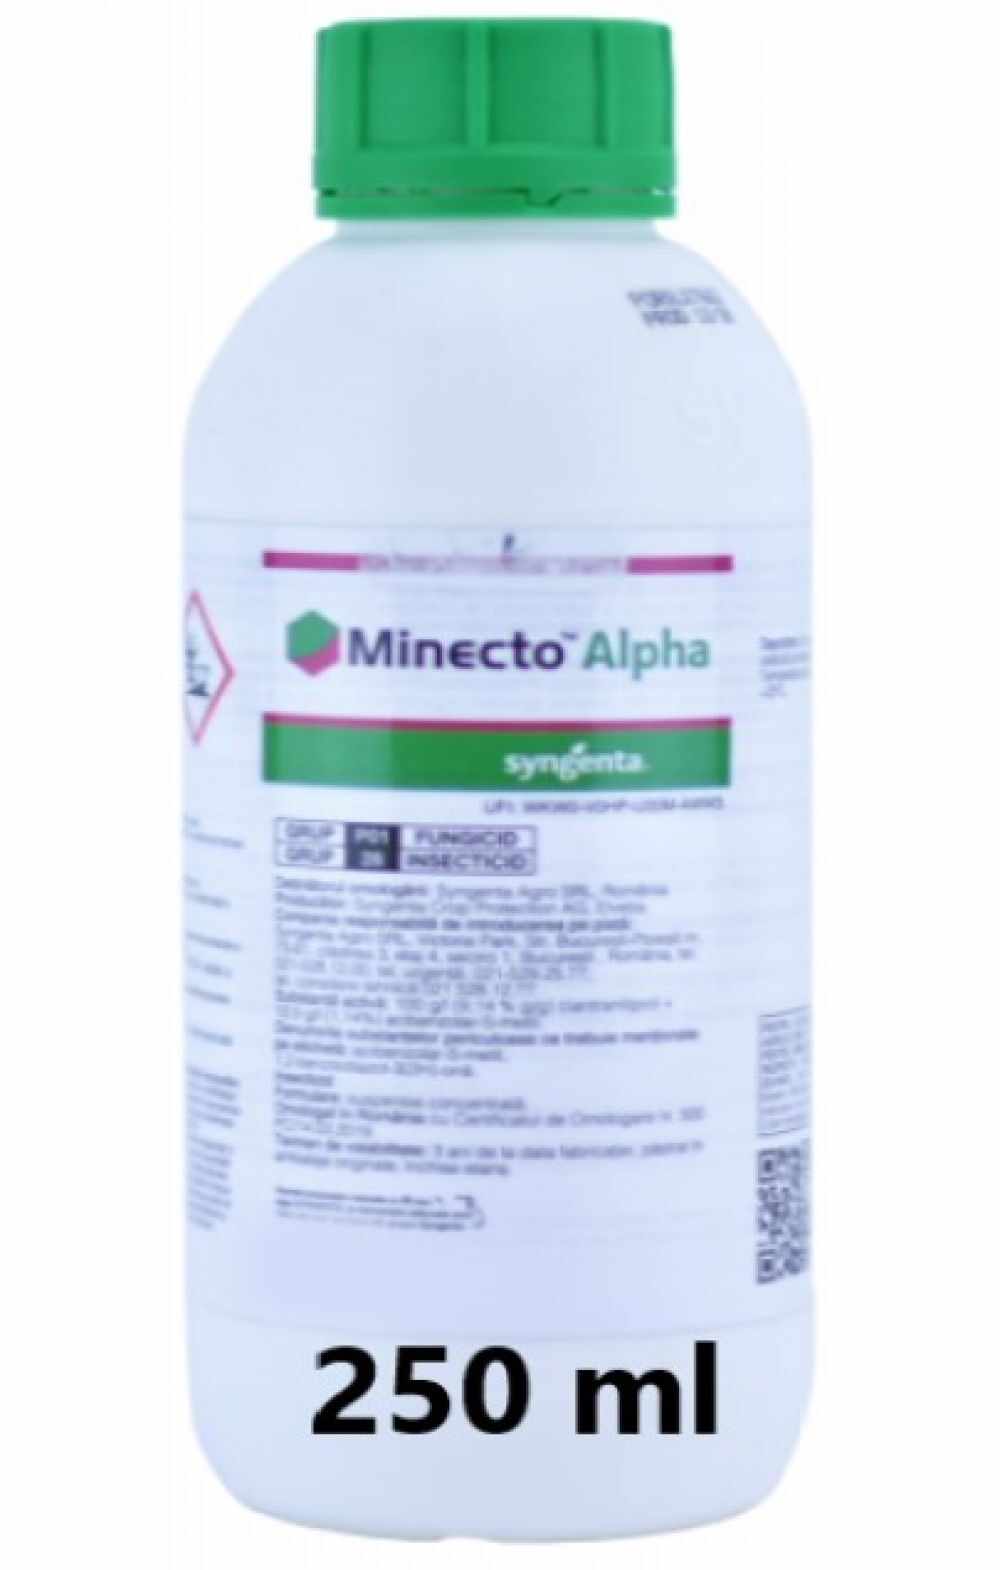 Insecticid Minecto Alpha 250 ml